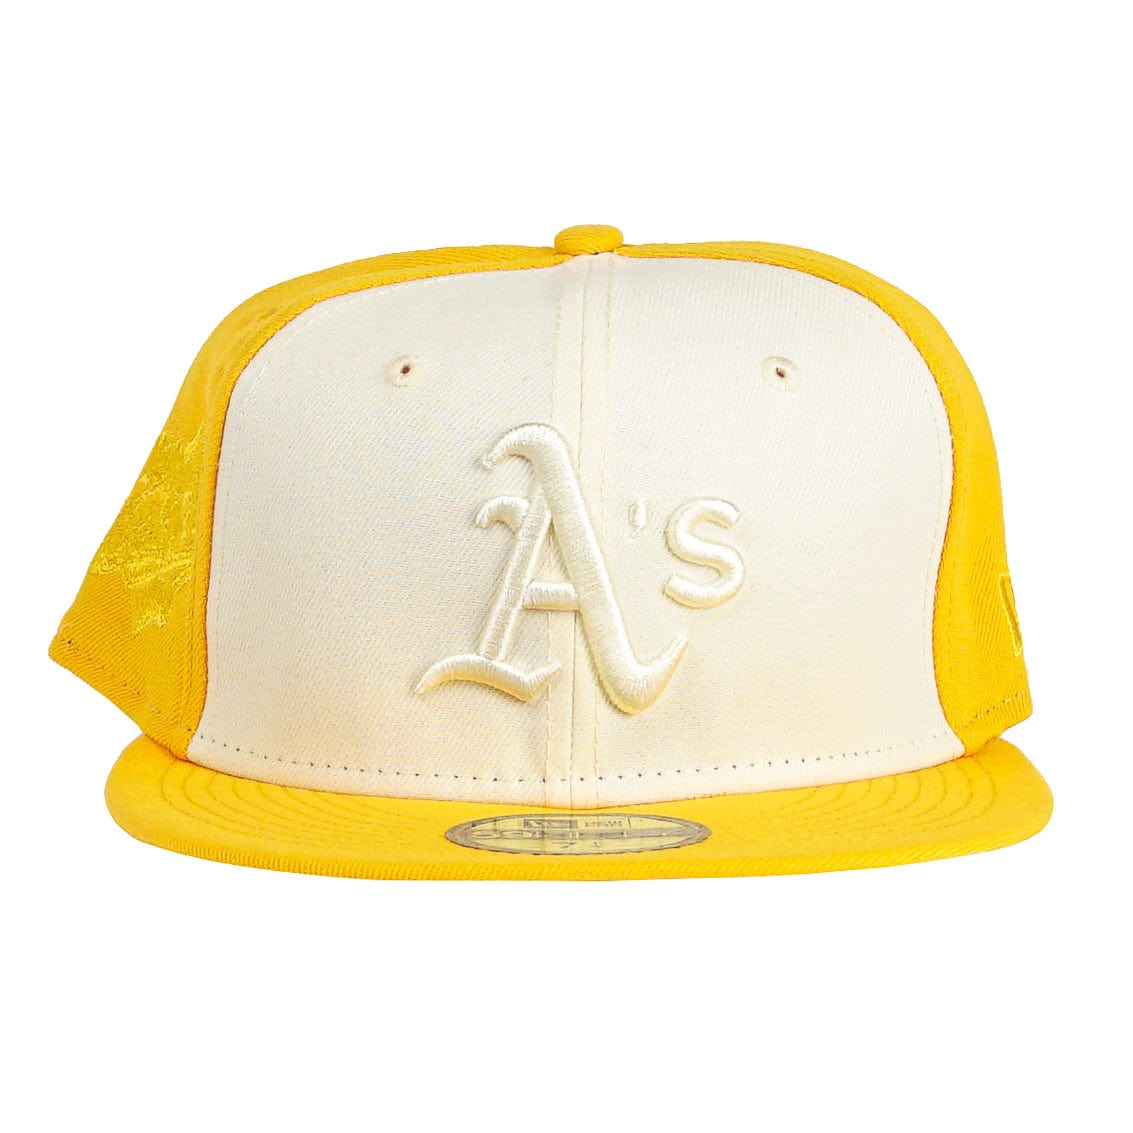 Oakland Athletics Tonal 2-Tone 59Fifty Fitted Hat in yellow and cream